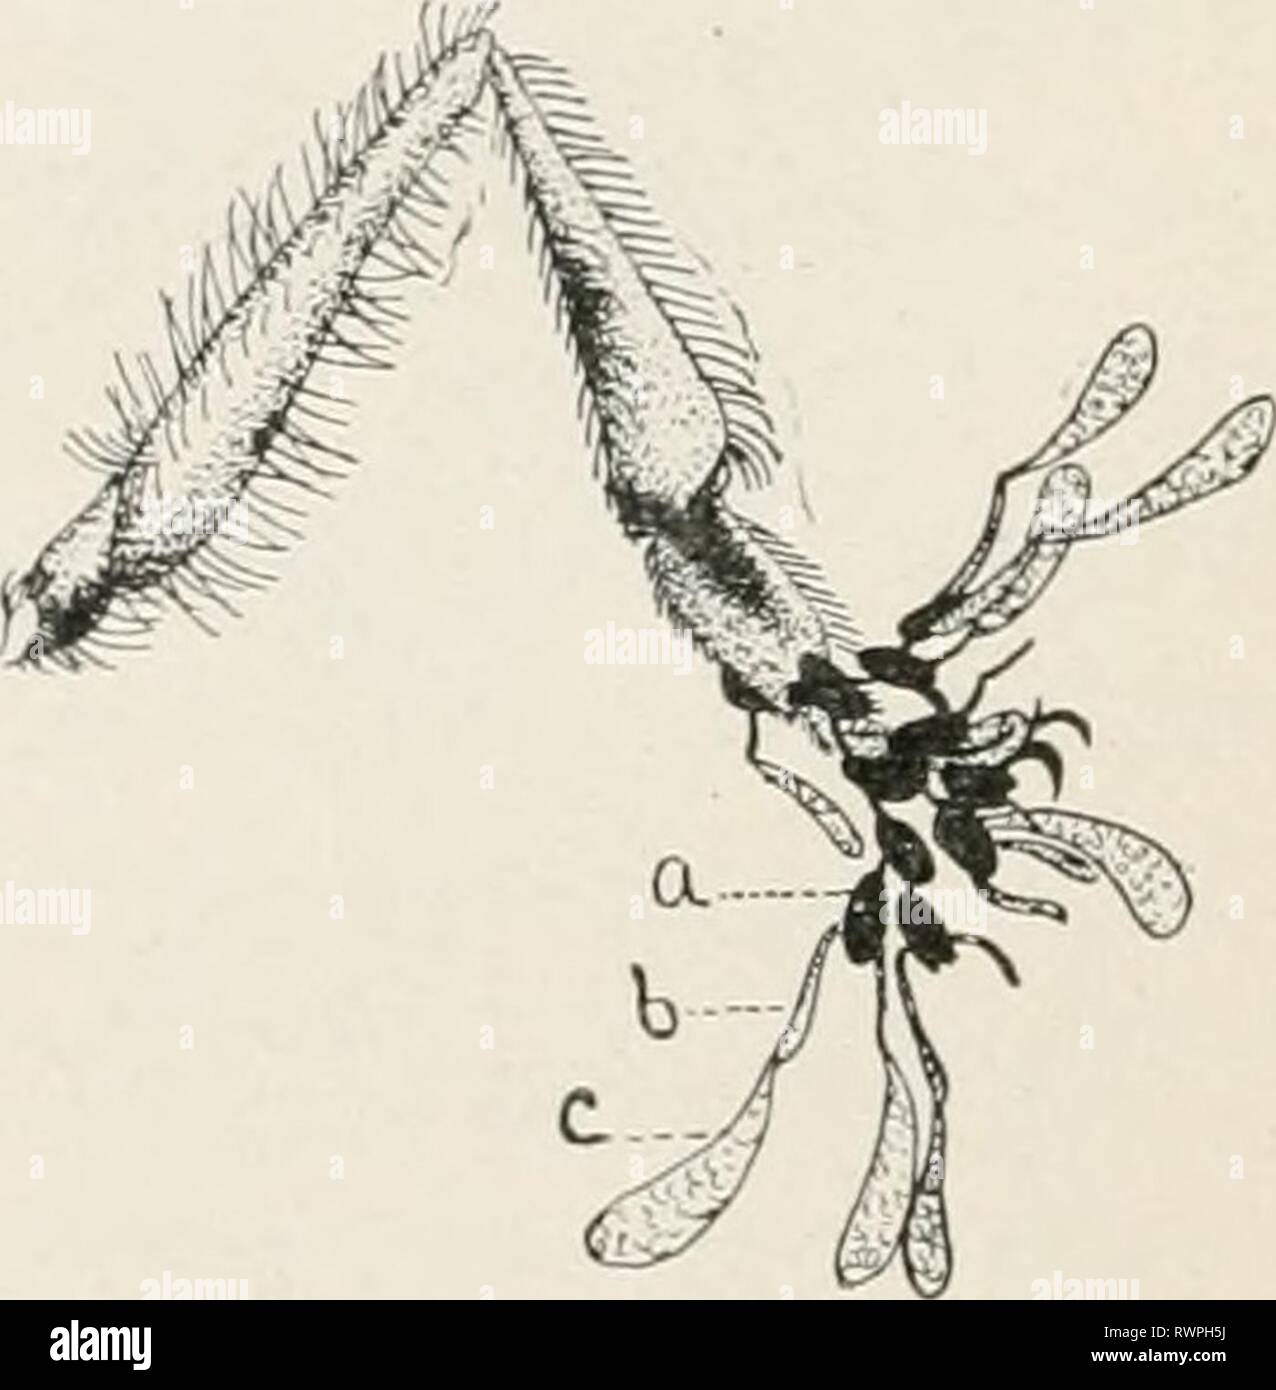 Elementary studies in insect life Elementary studies in insect life elementarystudie00hunt Year: 1902  FIG. 96. Pollen-masses attached to leg of bee. a, central body (cor- FIG. 95. Leg of insect pusculum); 6, band (or retinaculum) with small chain of corpus- joining pollen-mass to central body; cula. Photographed from c, pollen-mass (pollinium). Drawn nature by W. C. Stevens. from nature. retinaculum. This serves to catch other corpuscula rest- ing in their natural positions, so that we can frequently find insects that have continued their visits, bearing a whole chain of these corpuscula atta Stock Photo